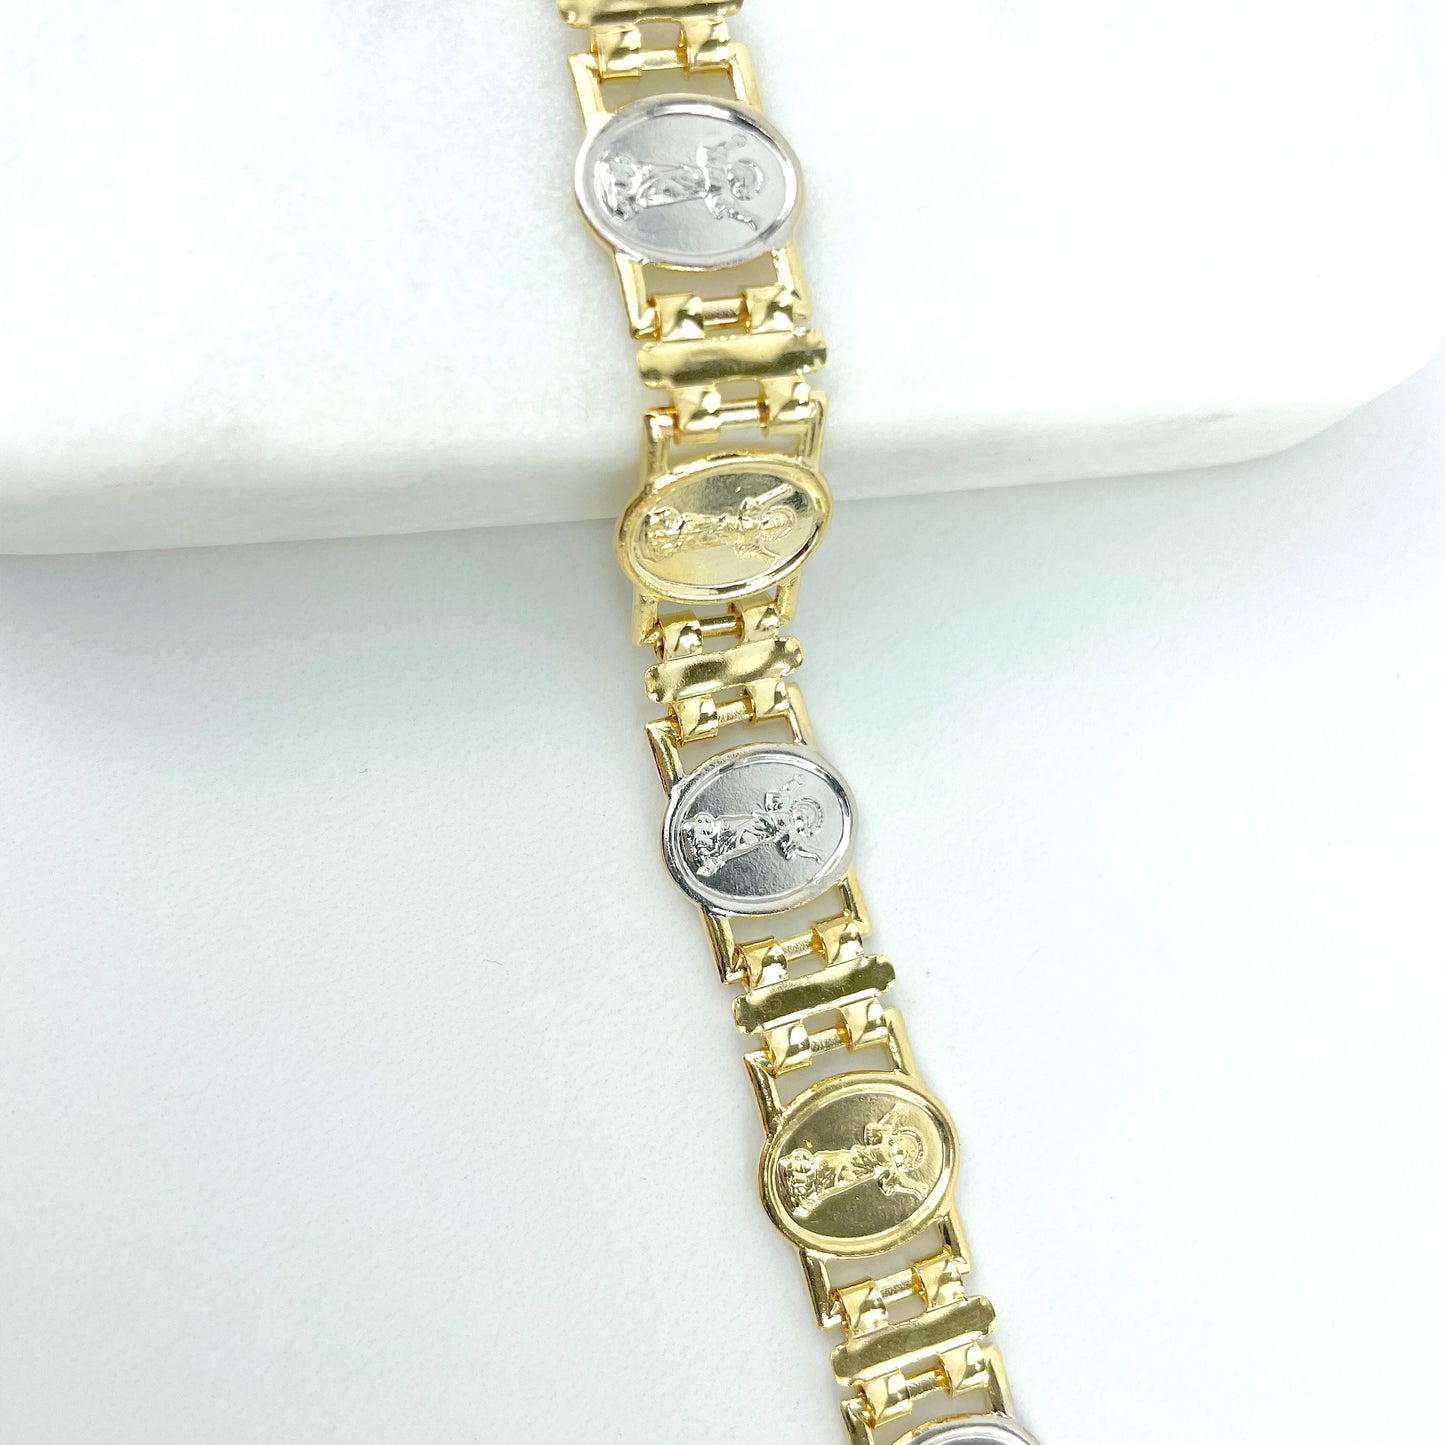 18k Gold Filled Two Tone Divino Nino, Divine Child Bracelet Wholesale Jewelry Making Supplies